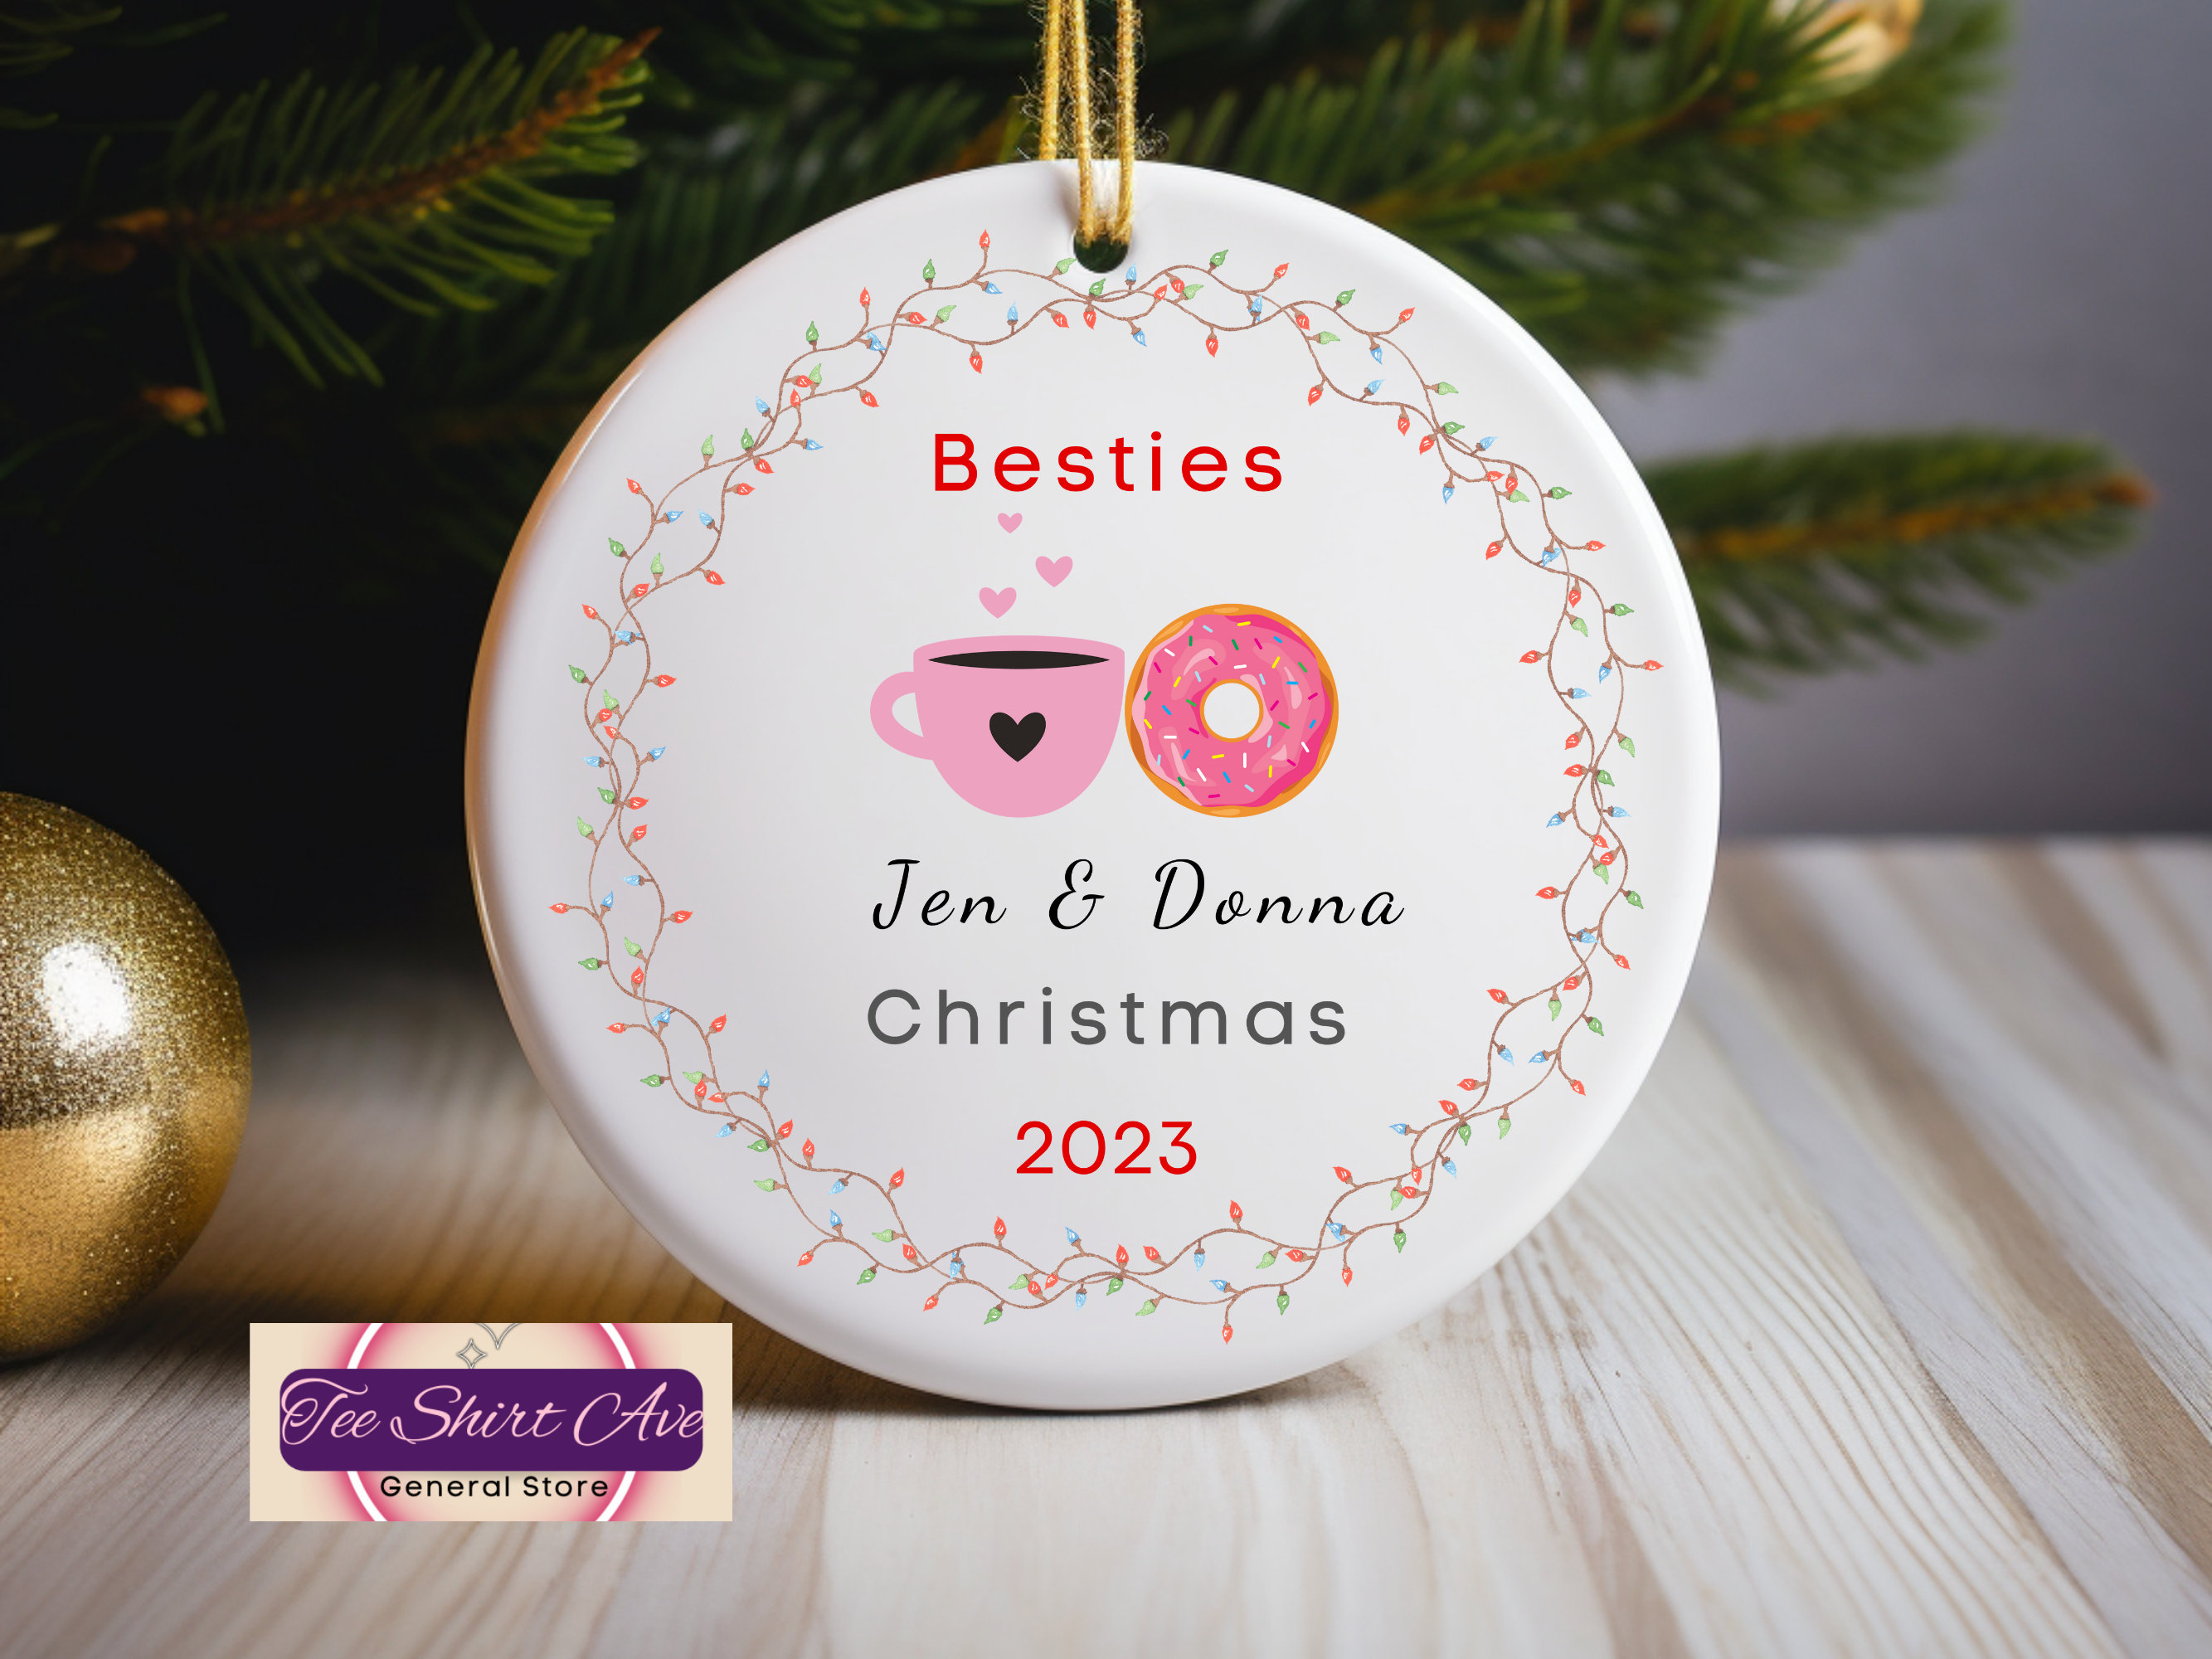  Neighbor Gifts Christmas Ornaments - Funny Friend BFF, Bestie  Neighbor, Ornament Gift - Christmas, Birthday Gifts for Neighborhood,  Friends, Women - Christmas Tree Decoration Ceramic Ornament : Home & Kitchen